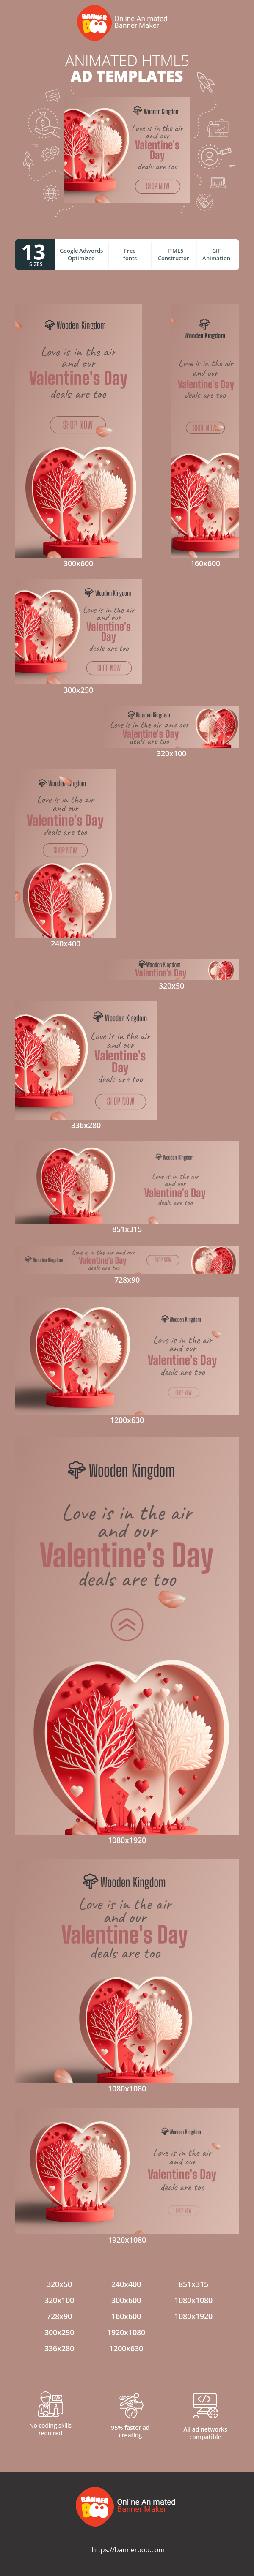 Szablon reklamy banerowej — Love Is In The Air And Our Valentine's Day Deals Are Too — Valentine's Day